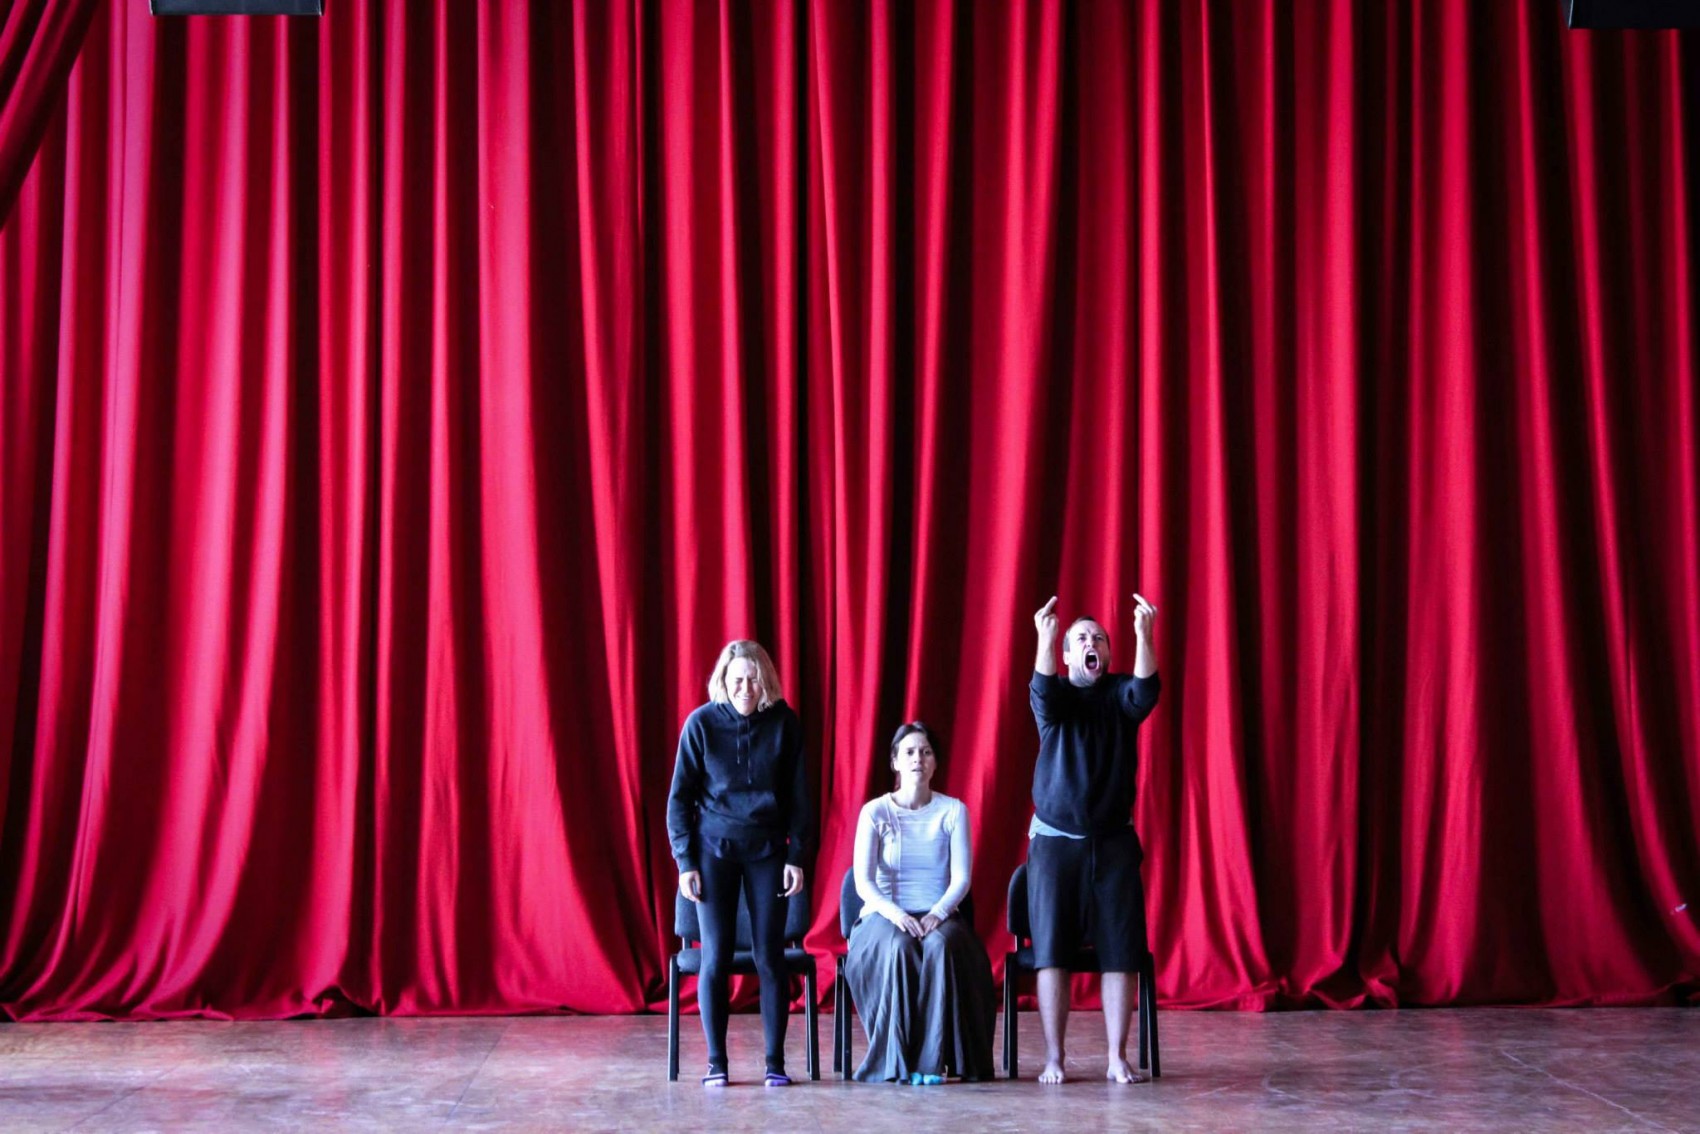 Two standing and one seated performers in a space in front a large red curtain